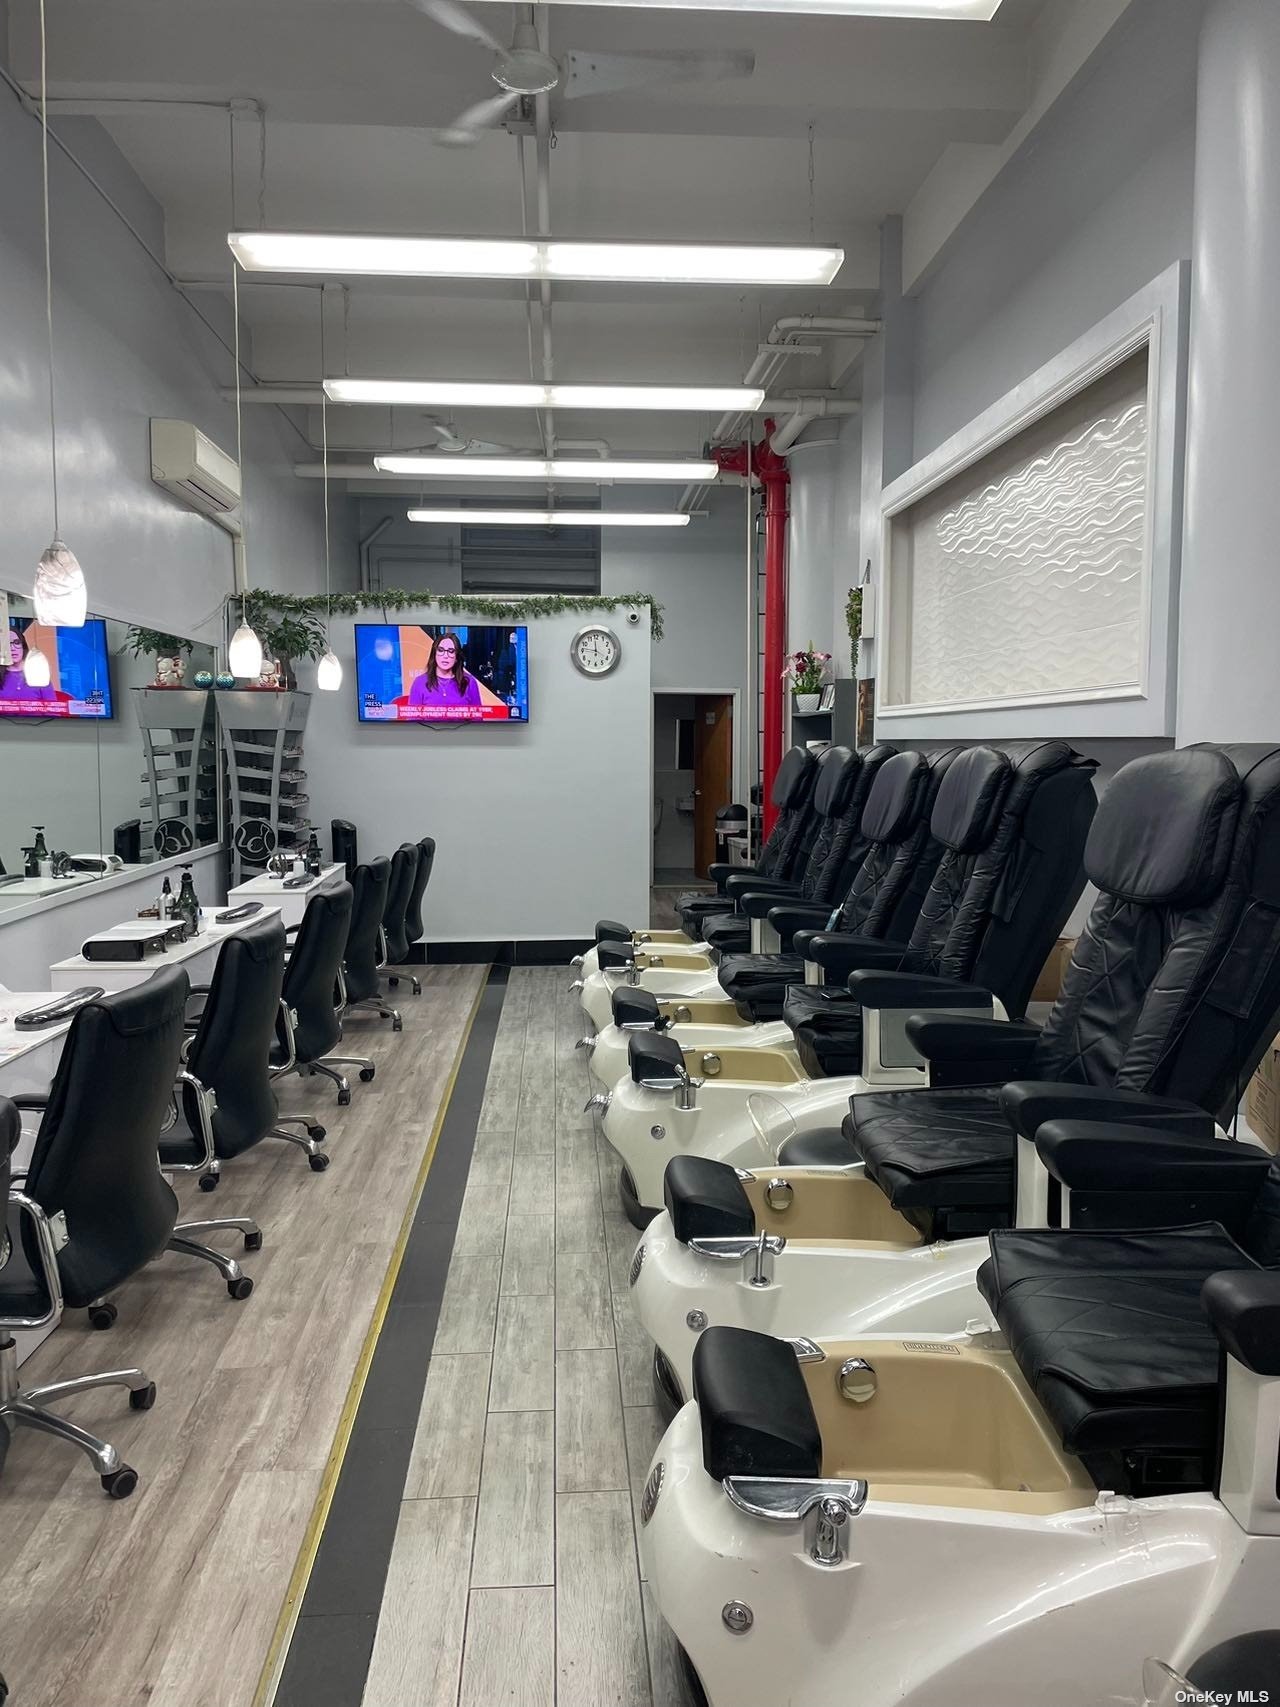 Business Opportunity in New York - 27  Manhattan, NY 10001